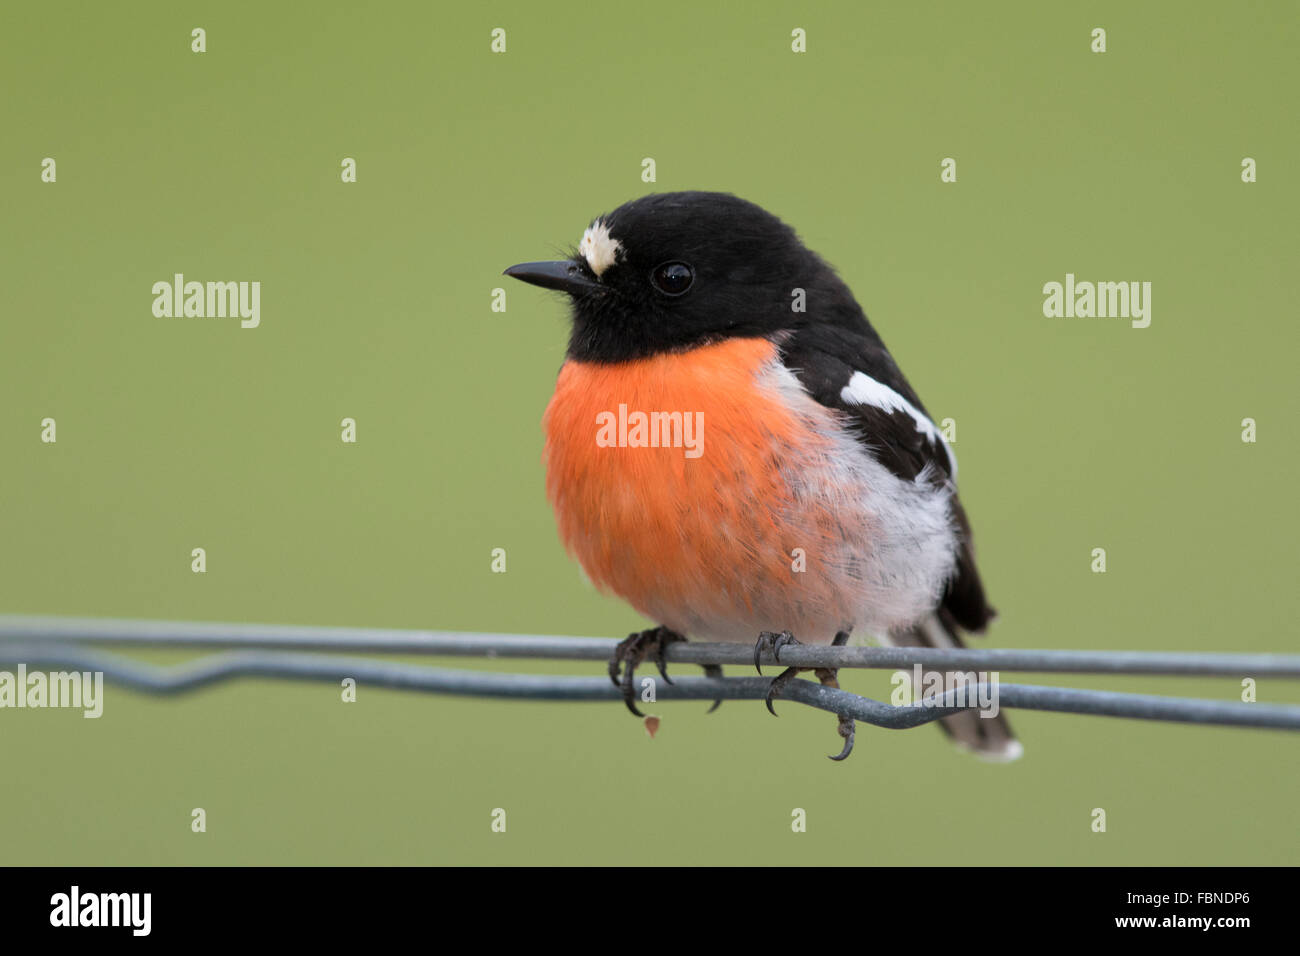 male Scarlet Robin (Petroica boodang) perched on a wire fence Stock Photo